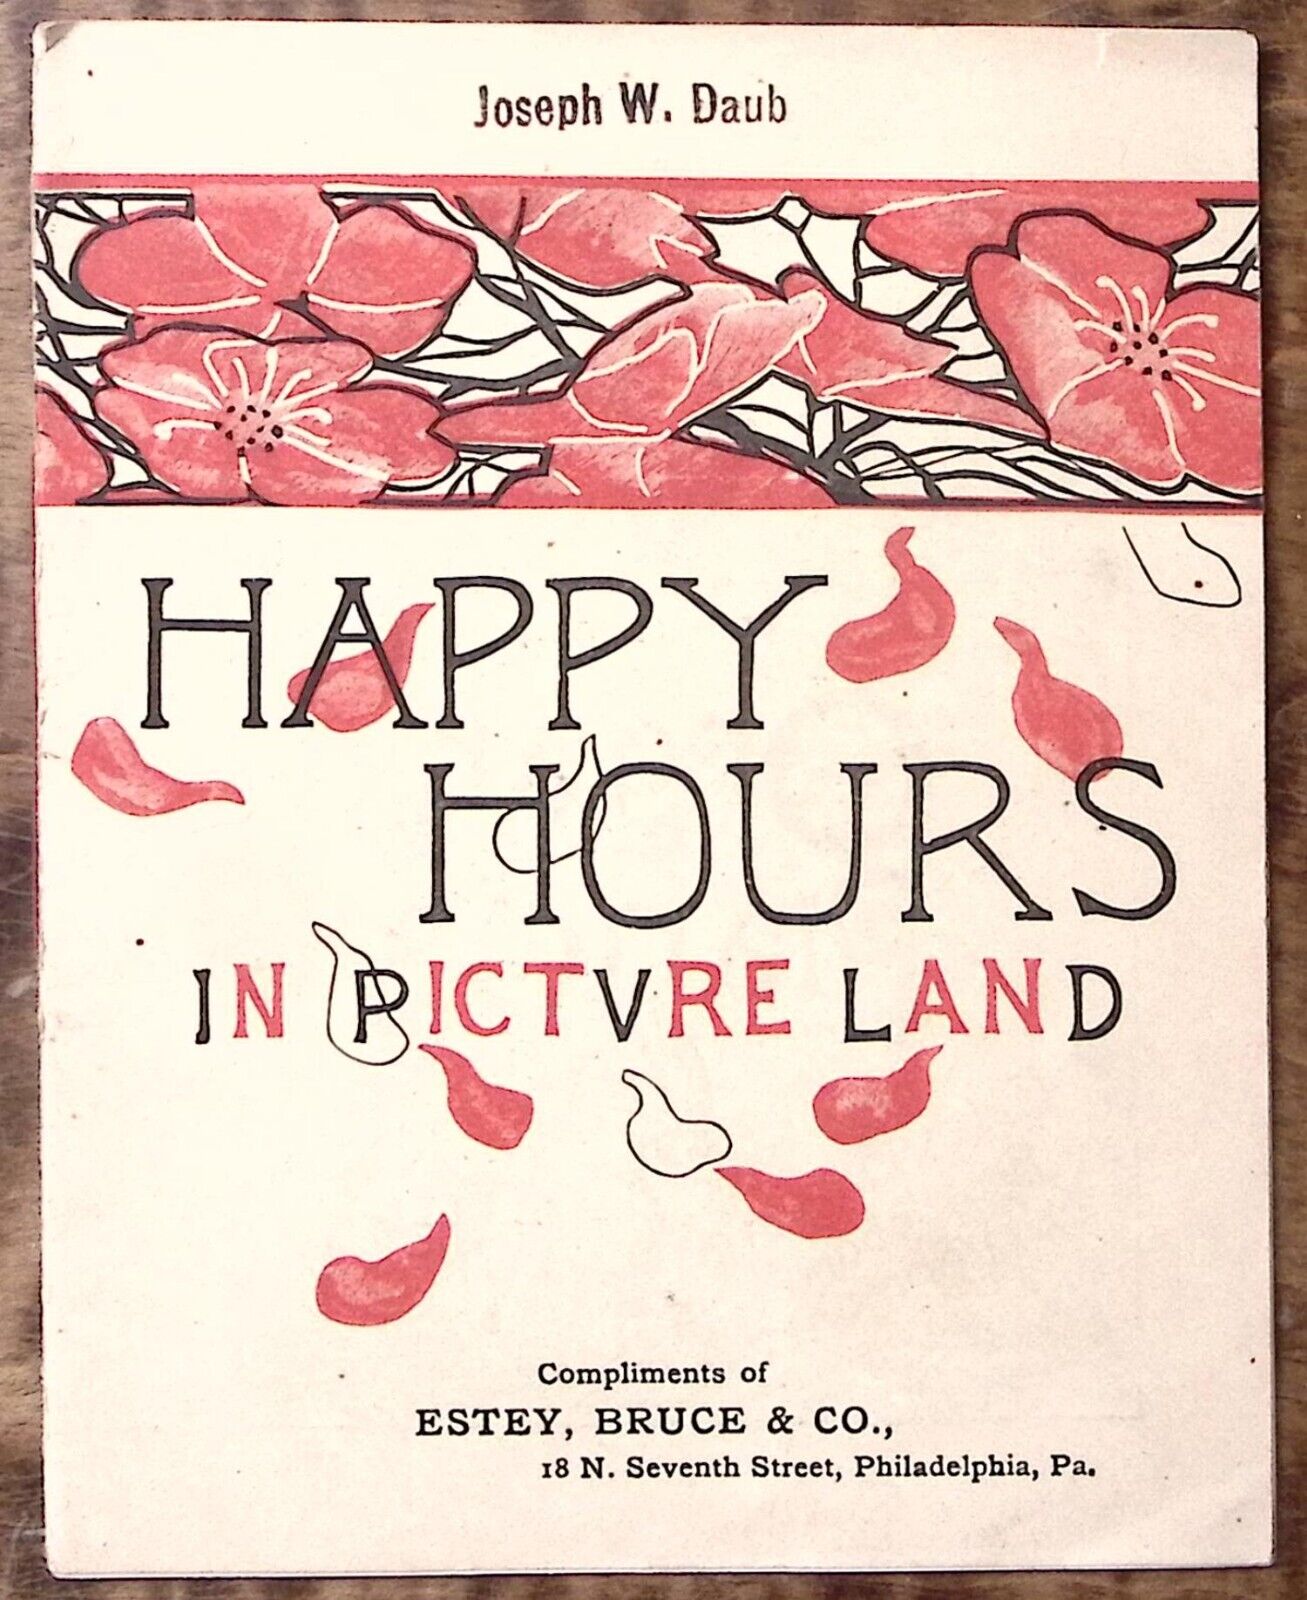 1880s HAPPY HOURS IN PICTURE LAND MARY AND HER LAMB ESTEY ORGAN ADVERTISINGZ5408